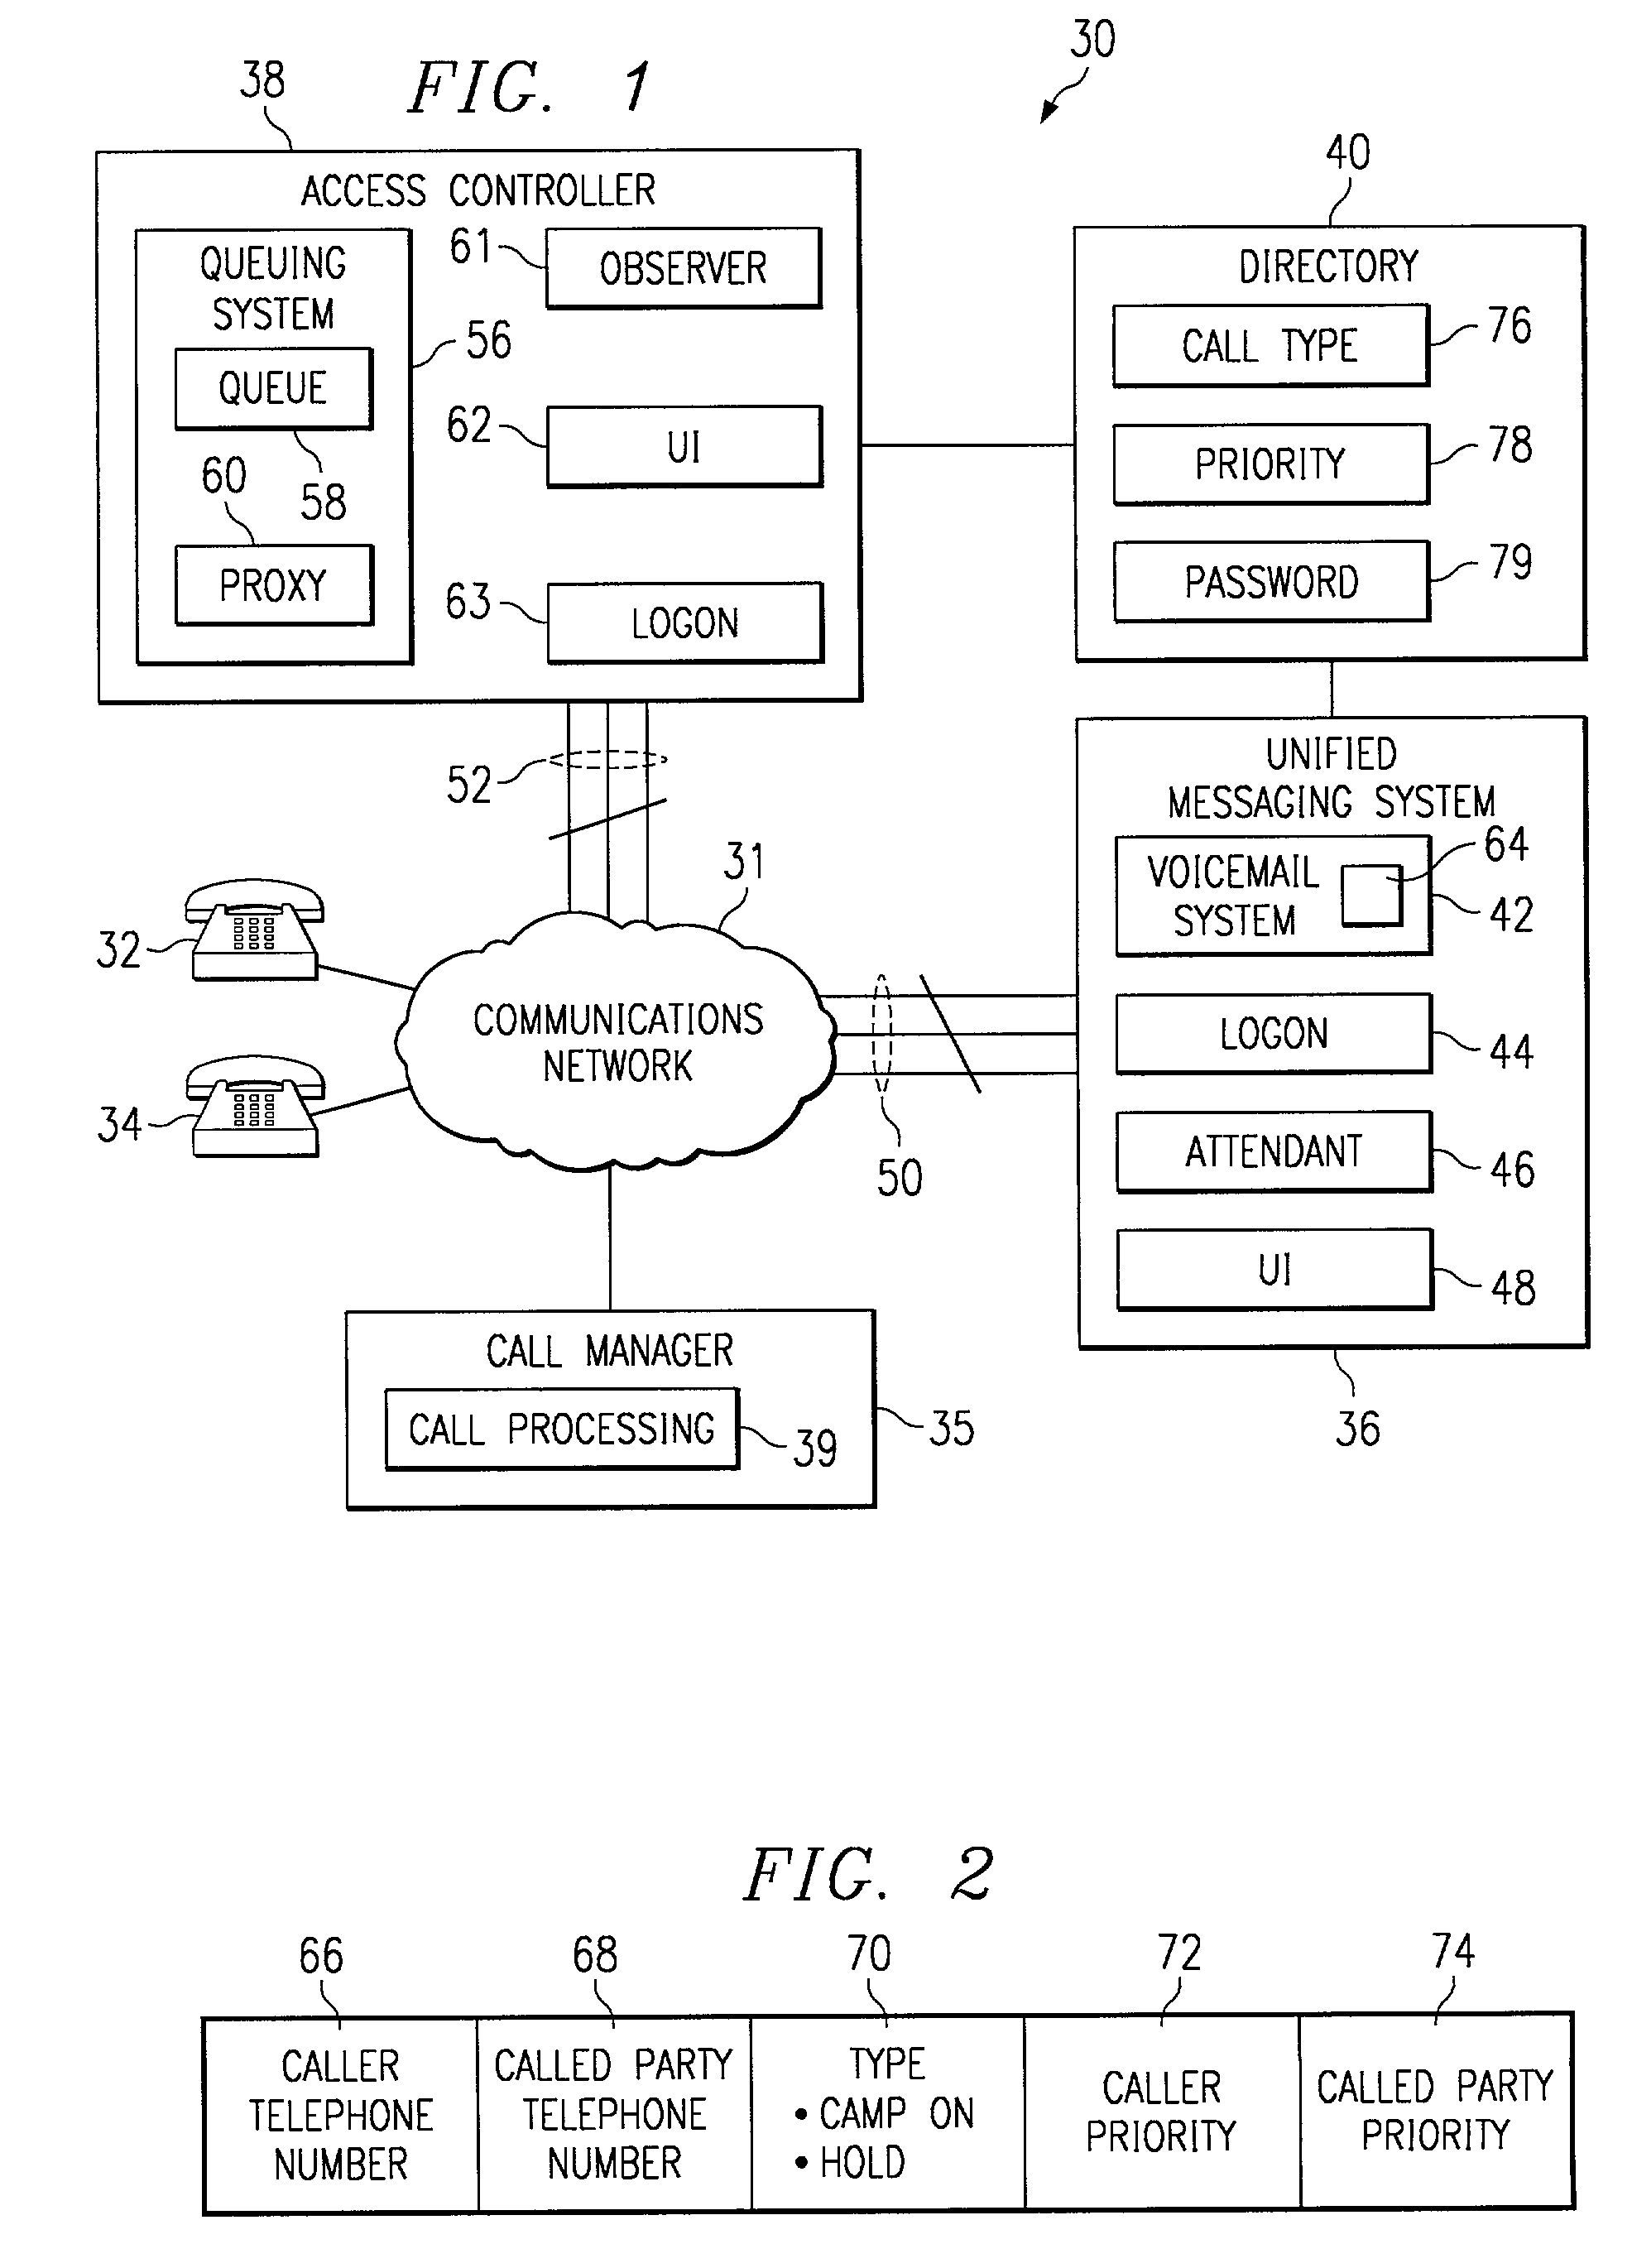 System and method for providing prioritized access to a messaging system